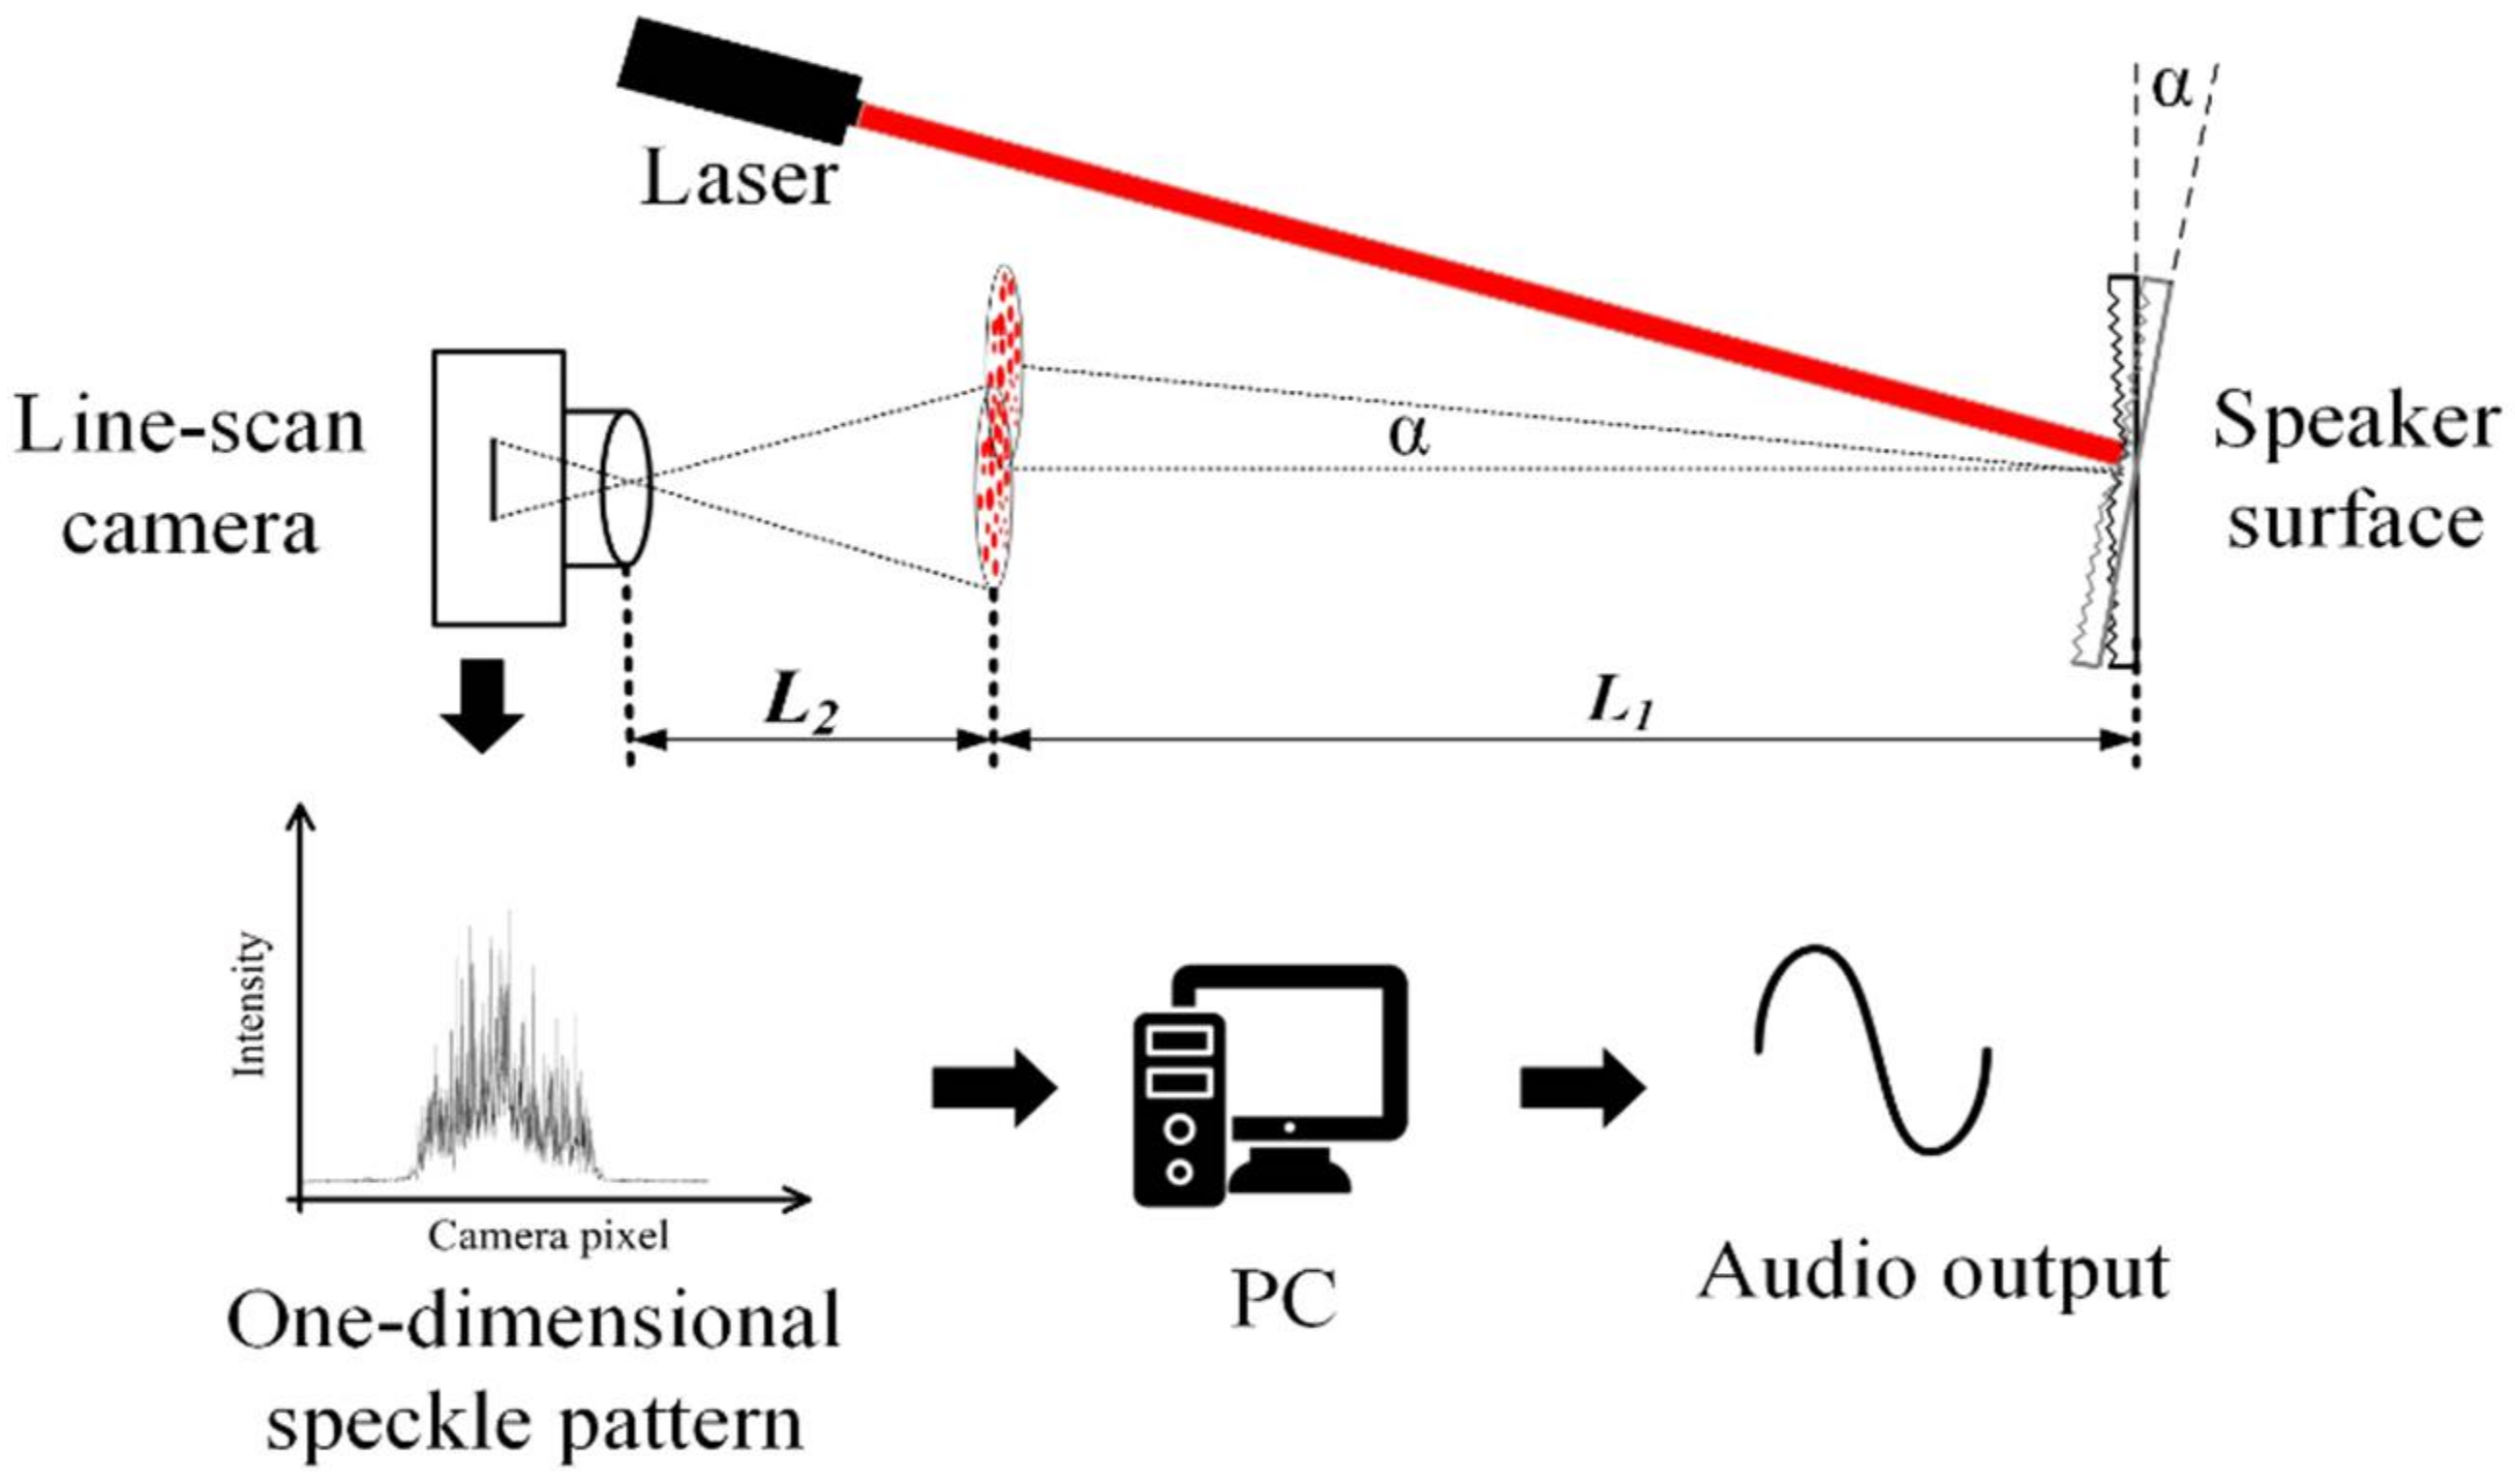 Sensors | Free Full-Text | The 20k Samples-Per-Second Real Time Detection  of Acoustic Vibration Based on Displacement Estimation of One-Dimensional  Laser Speckle Images